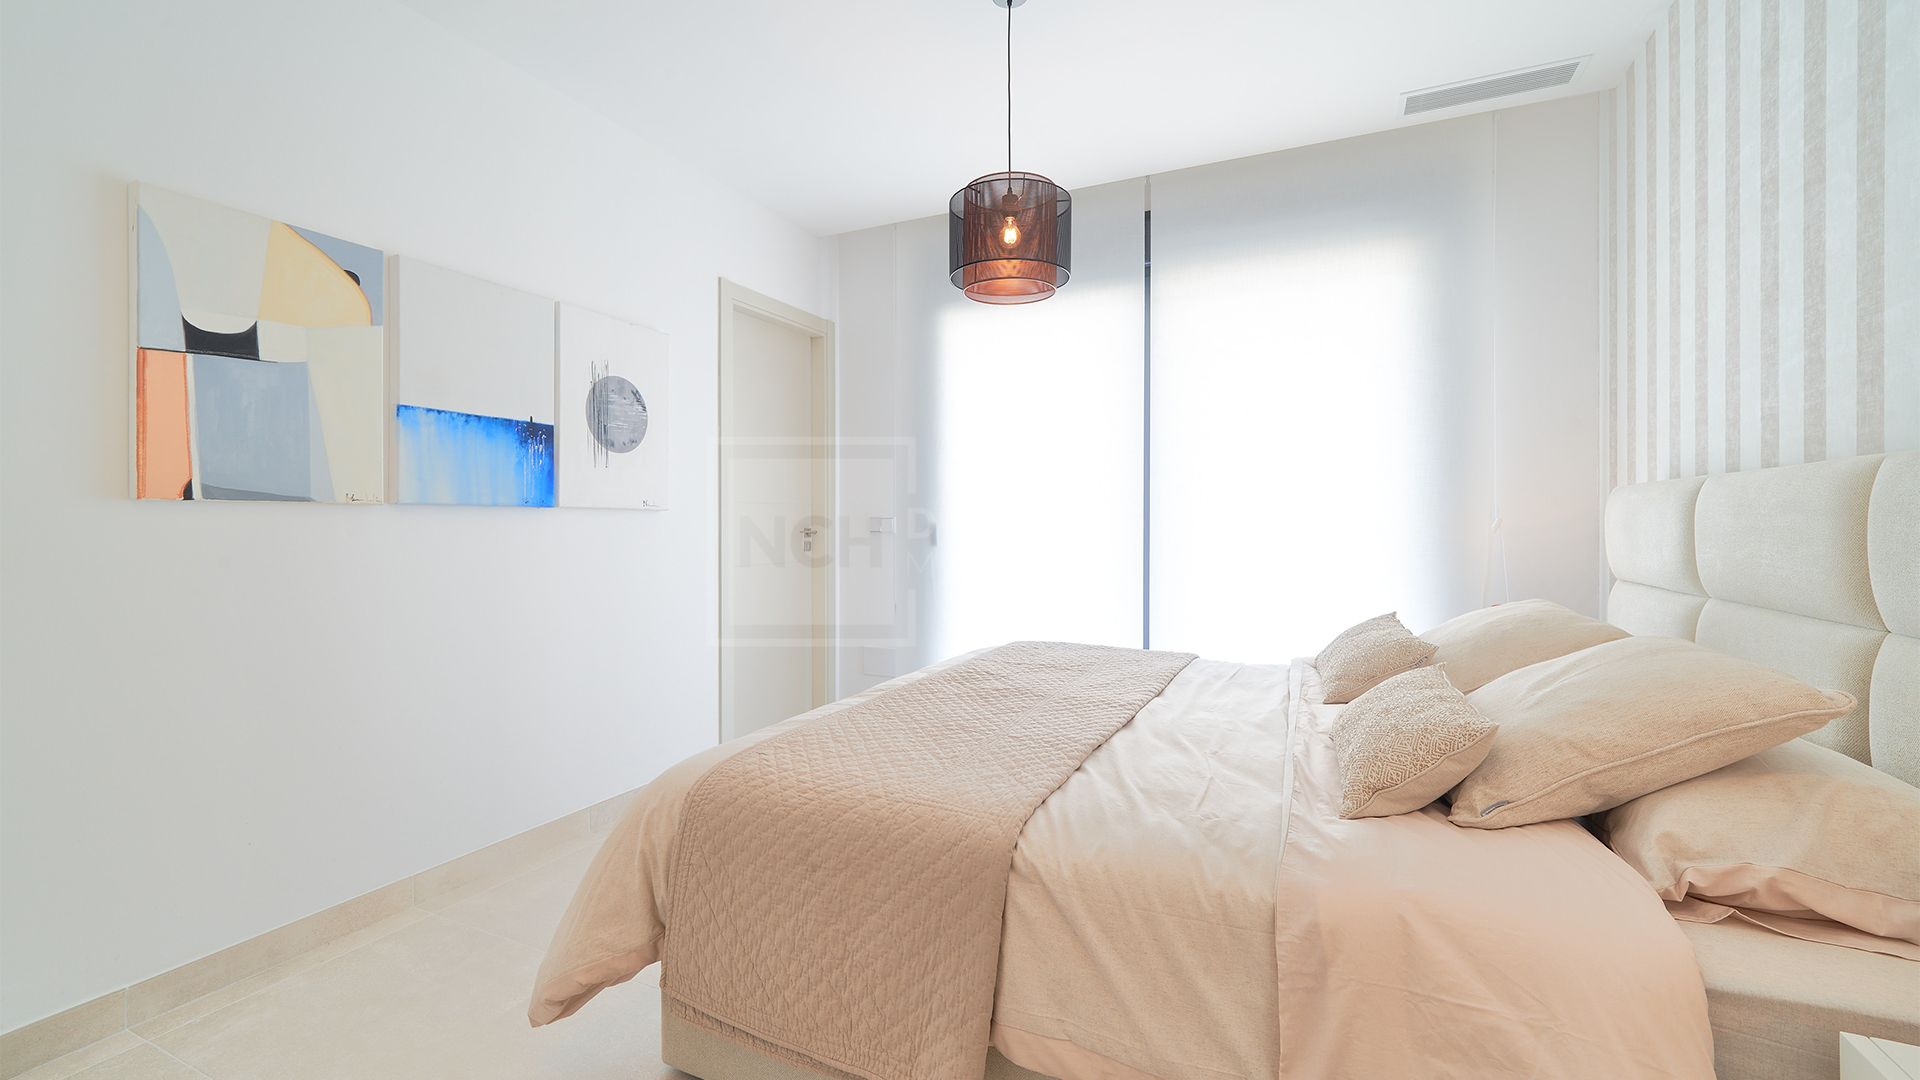 AMAZING VALUE BRAND NEW 2-BEDROOM GROUND FLOOR APARTMENT LOCATED IN ATALAYA, NEW GOLDEN MILE